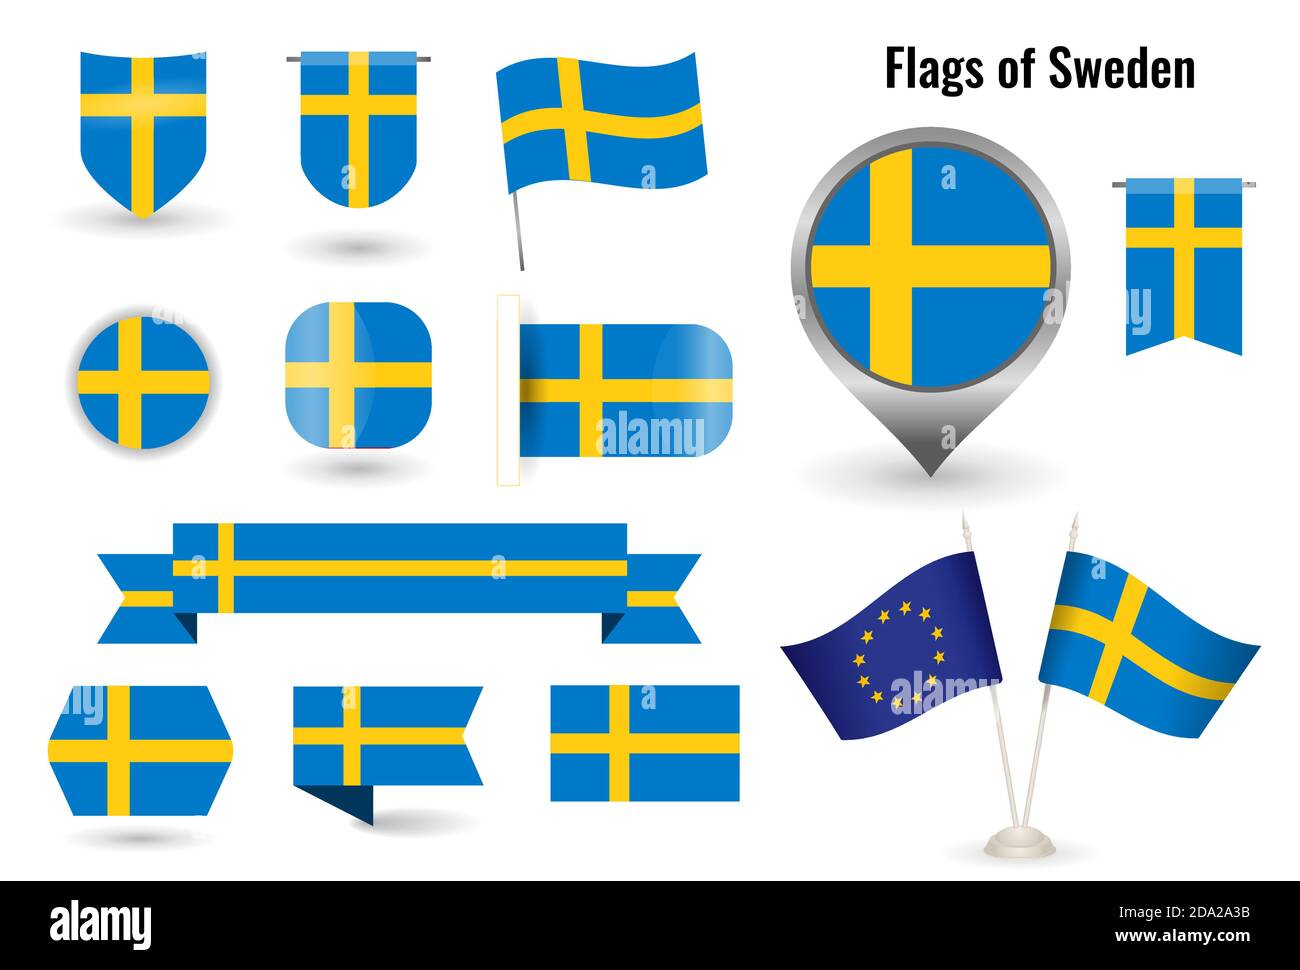 The Flag of Sweden. Big set of icons and symbols. Square and round Swedish flag. Collection of different flags of horizontal and vertical. Stock Vector